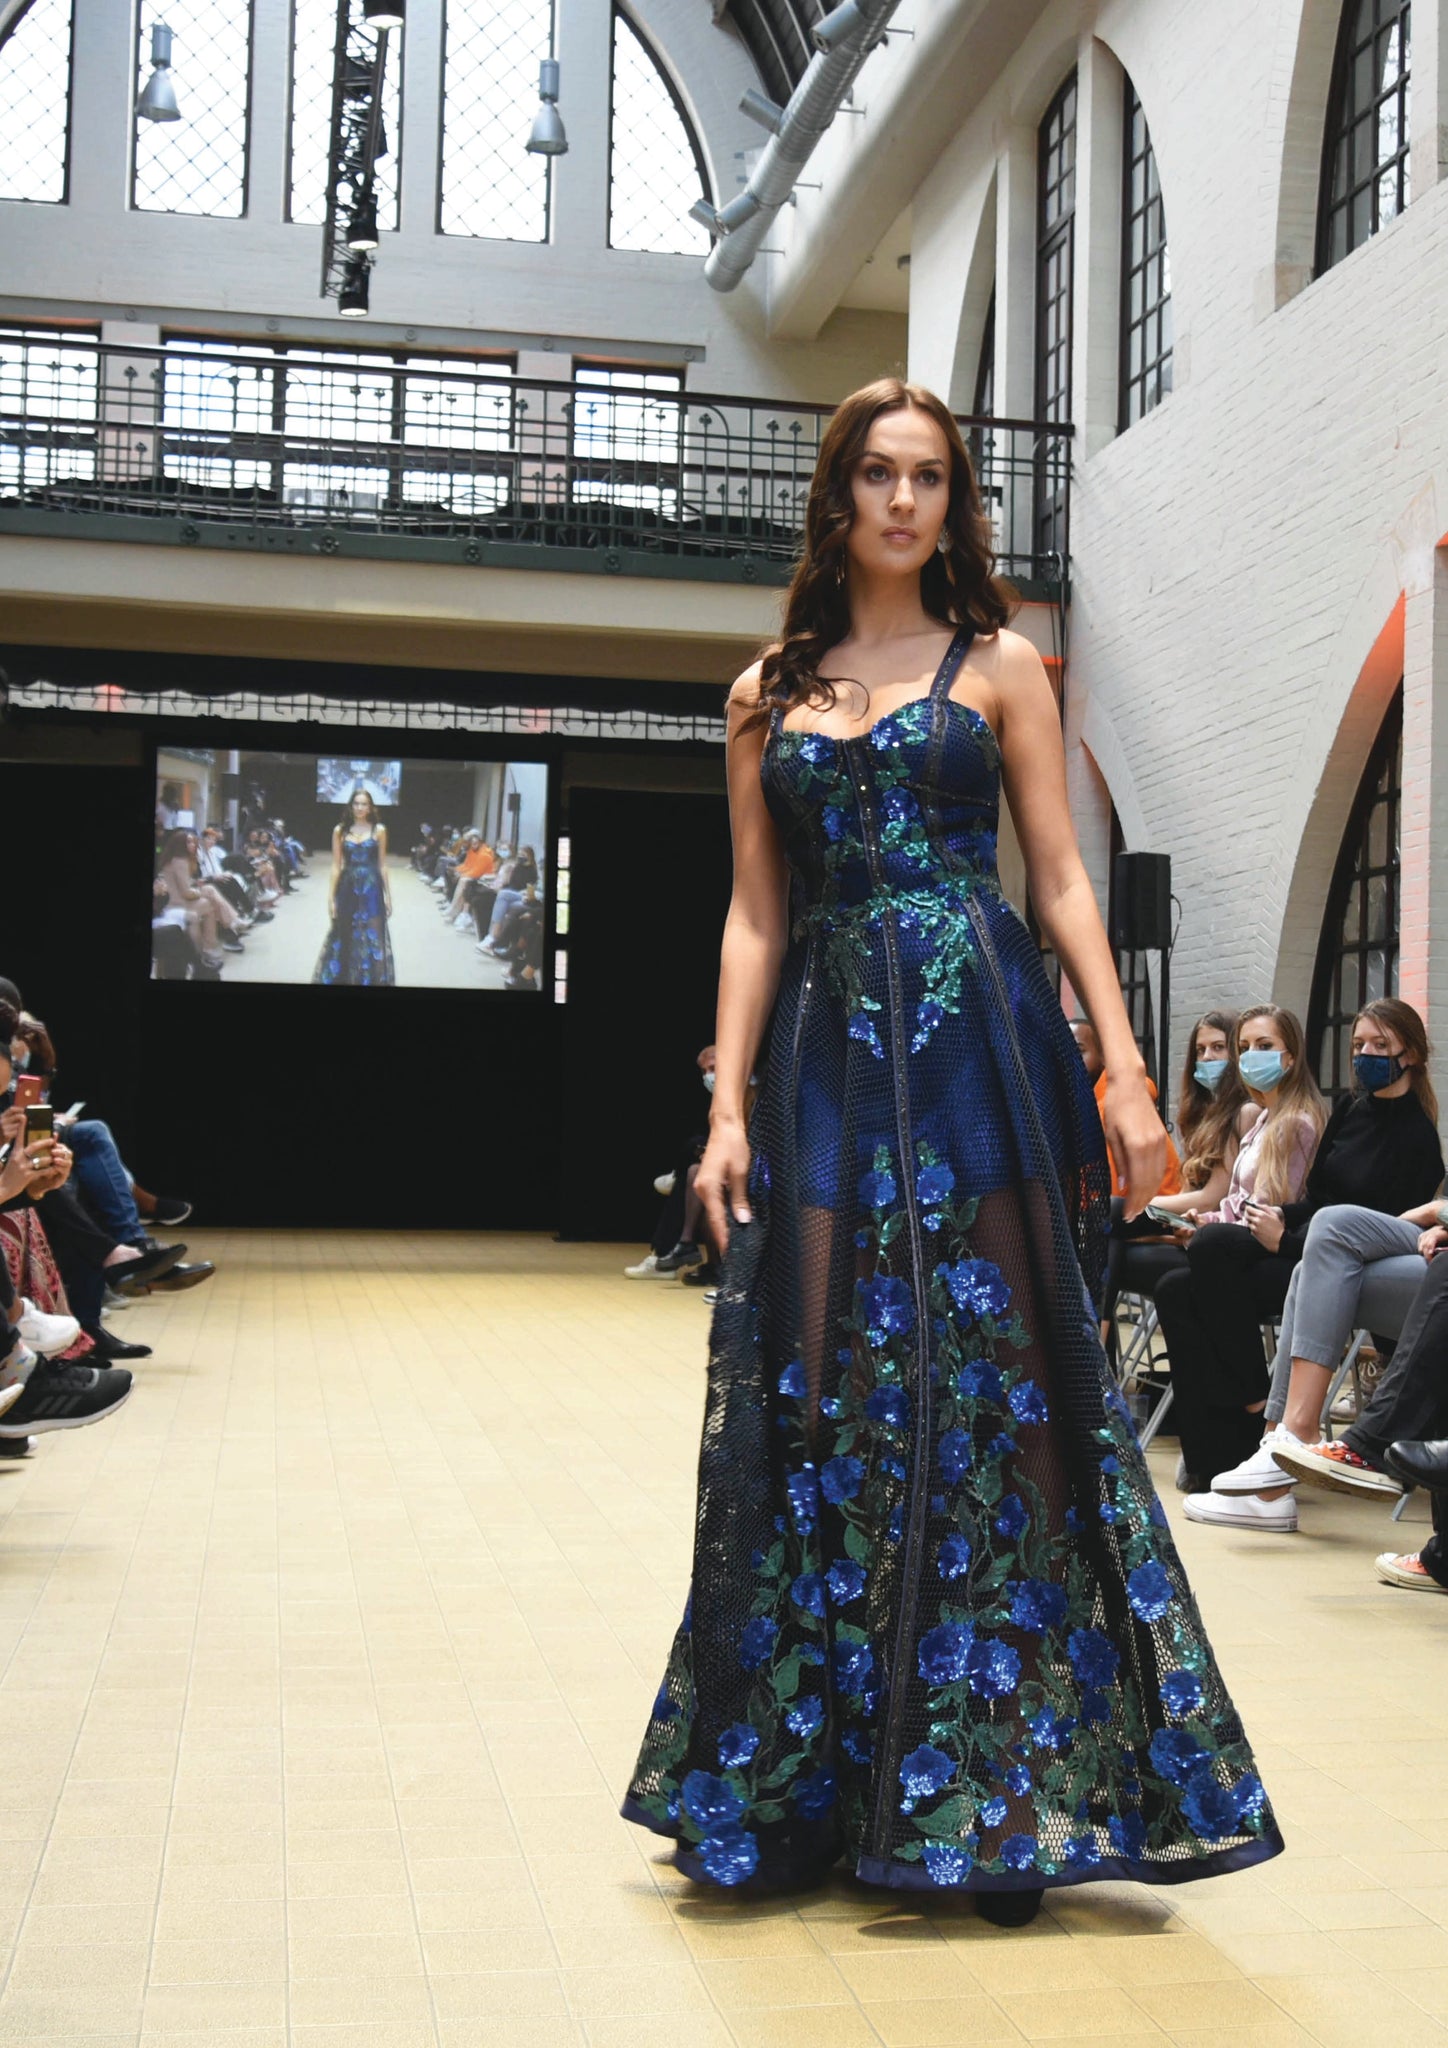 Helena blue roses couture evening gown